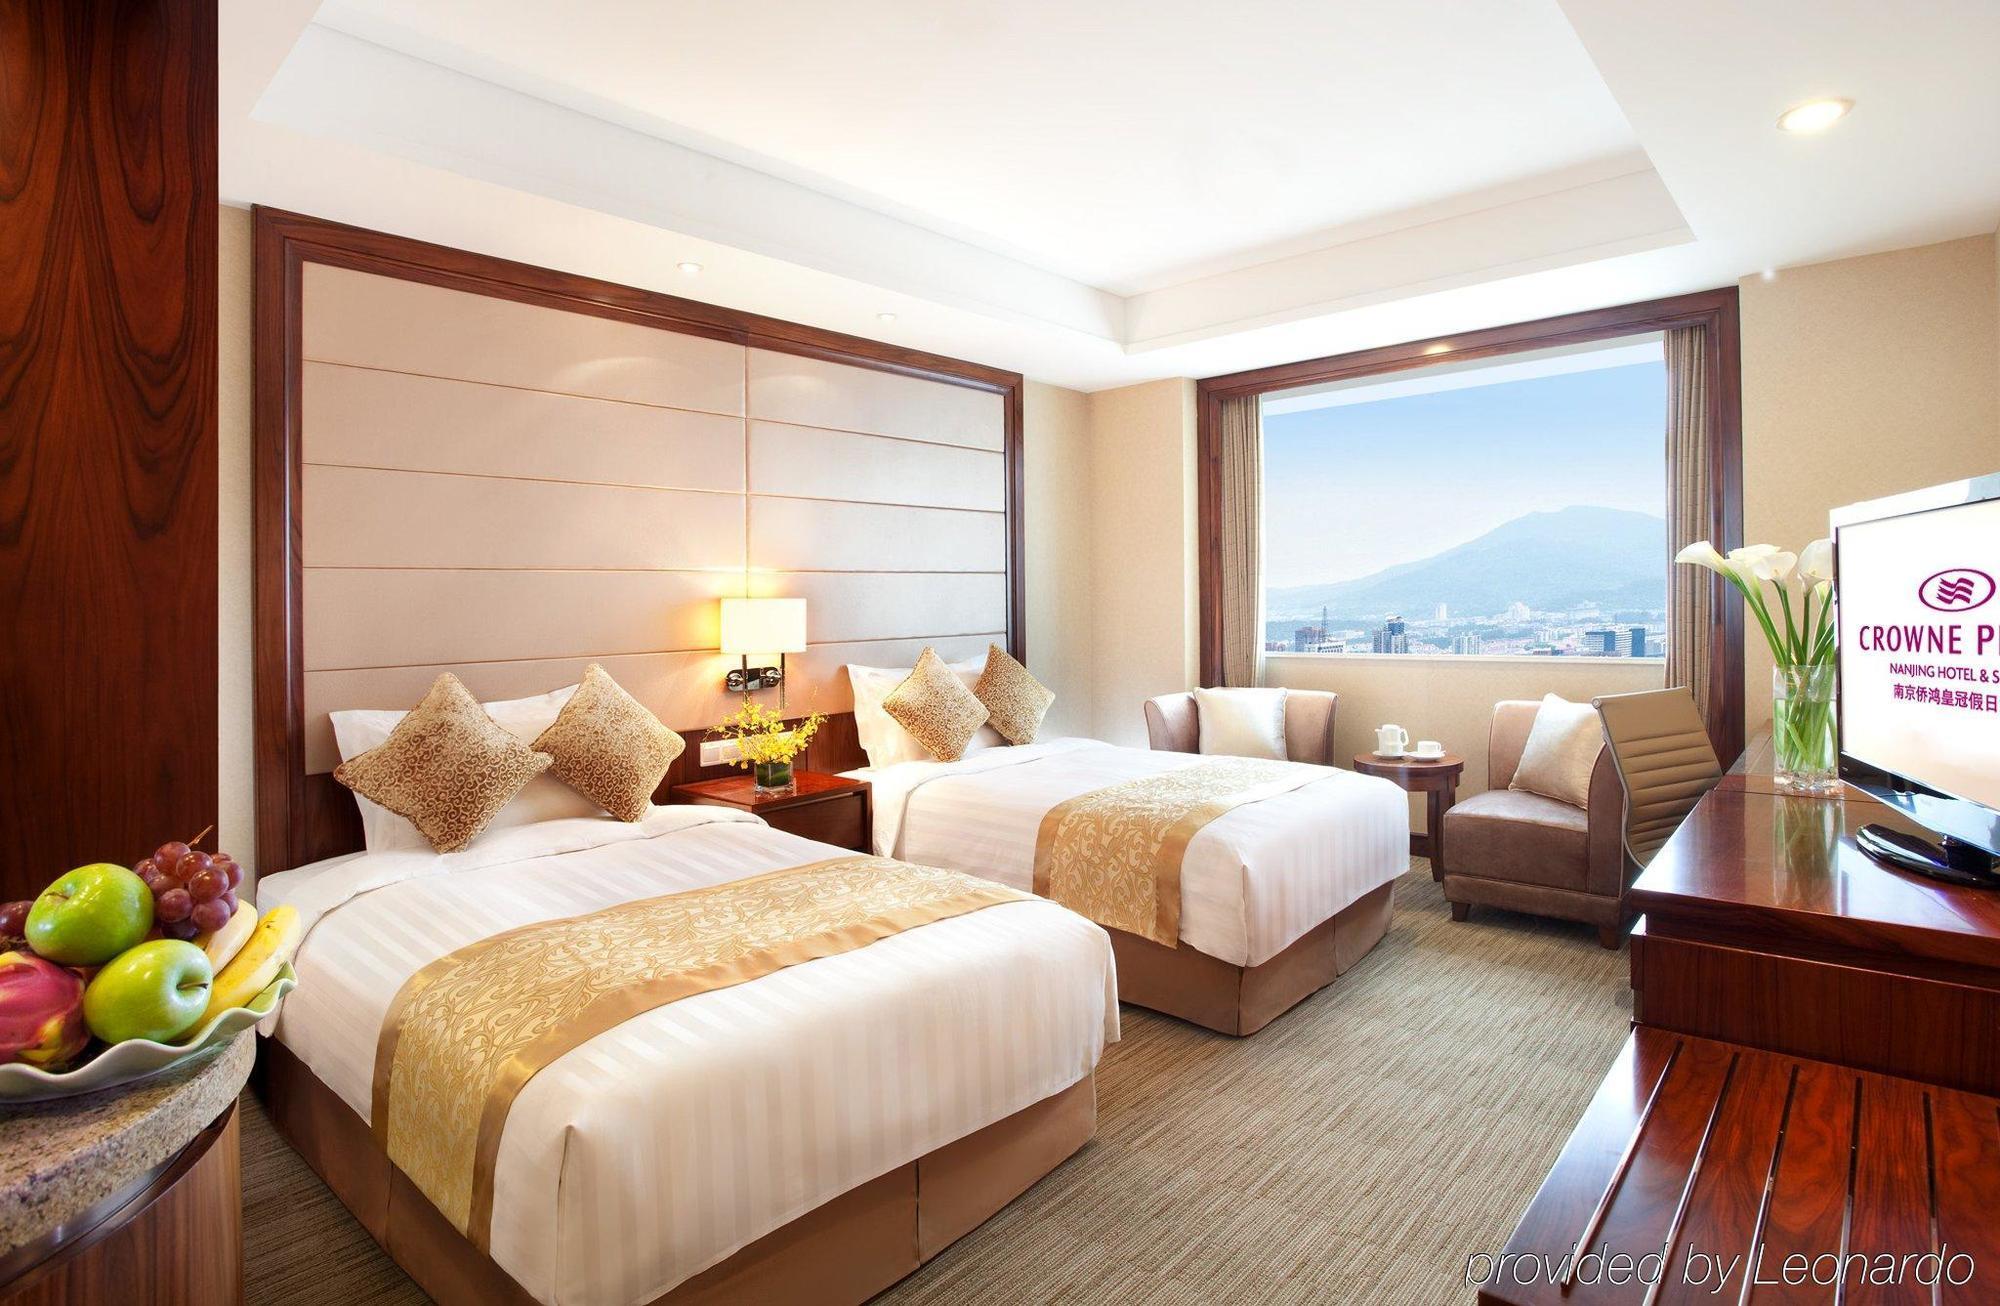 Crowne Plaza Nanjing Hotels & Suites Room photo